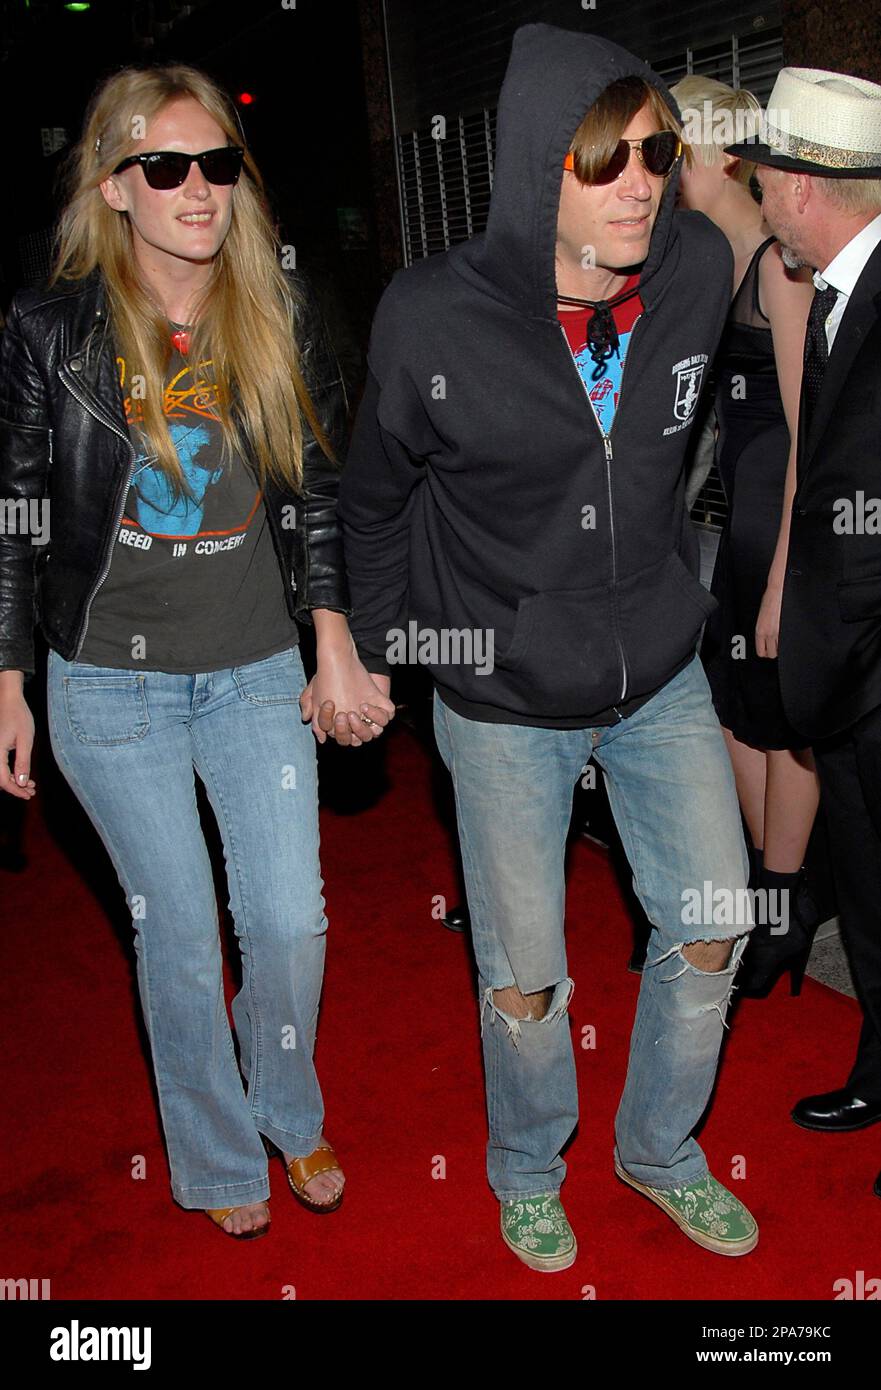 Singer Evan Dando, right, and model Elizabeth Moses walk the press line at the NME Awards USA in Los Angeles on Wednesday, April 23, 2008. (AP Photo/Dan Steinberg) Stockfoto